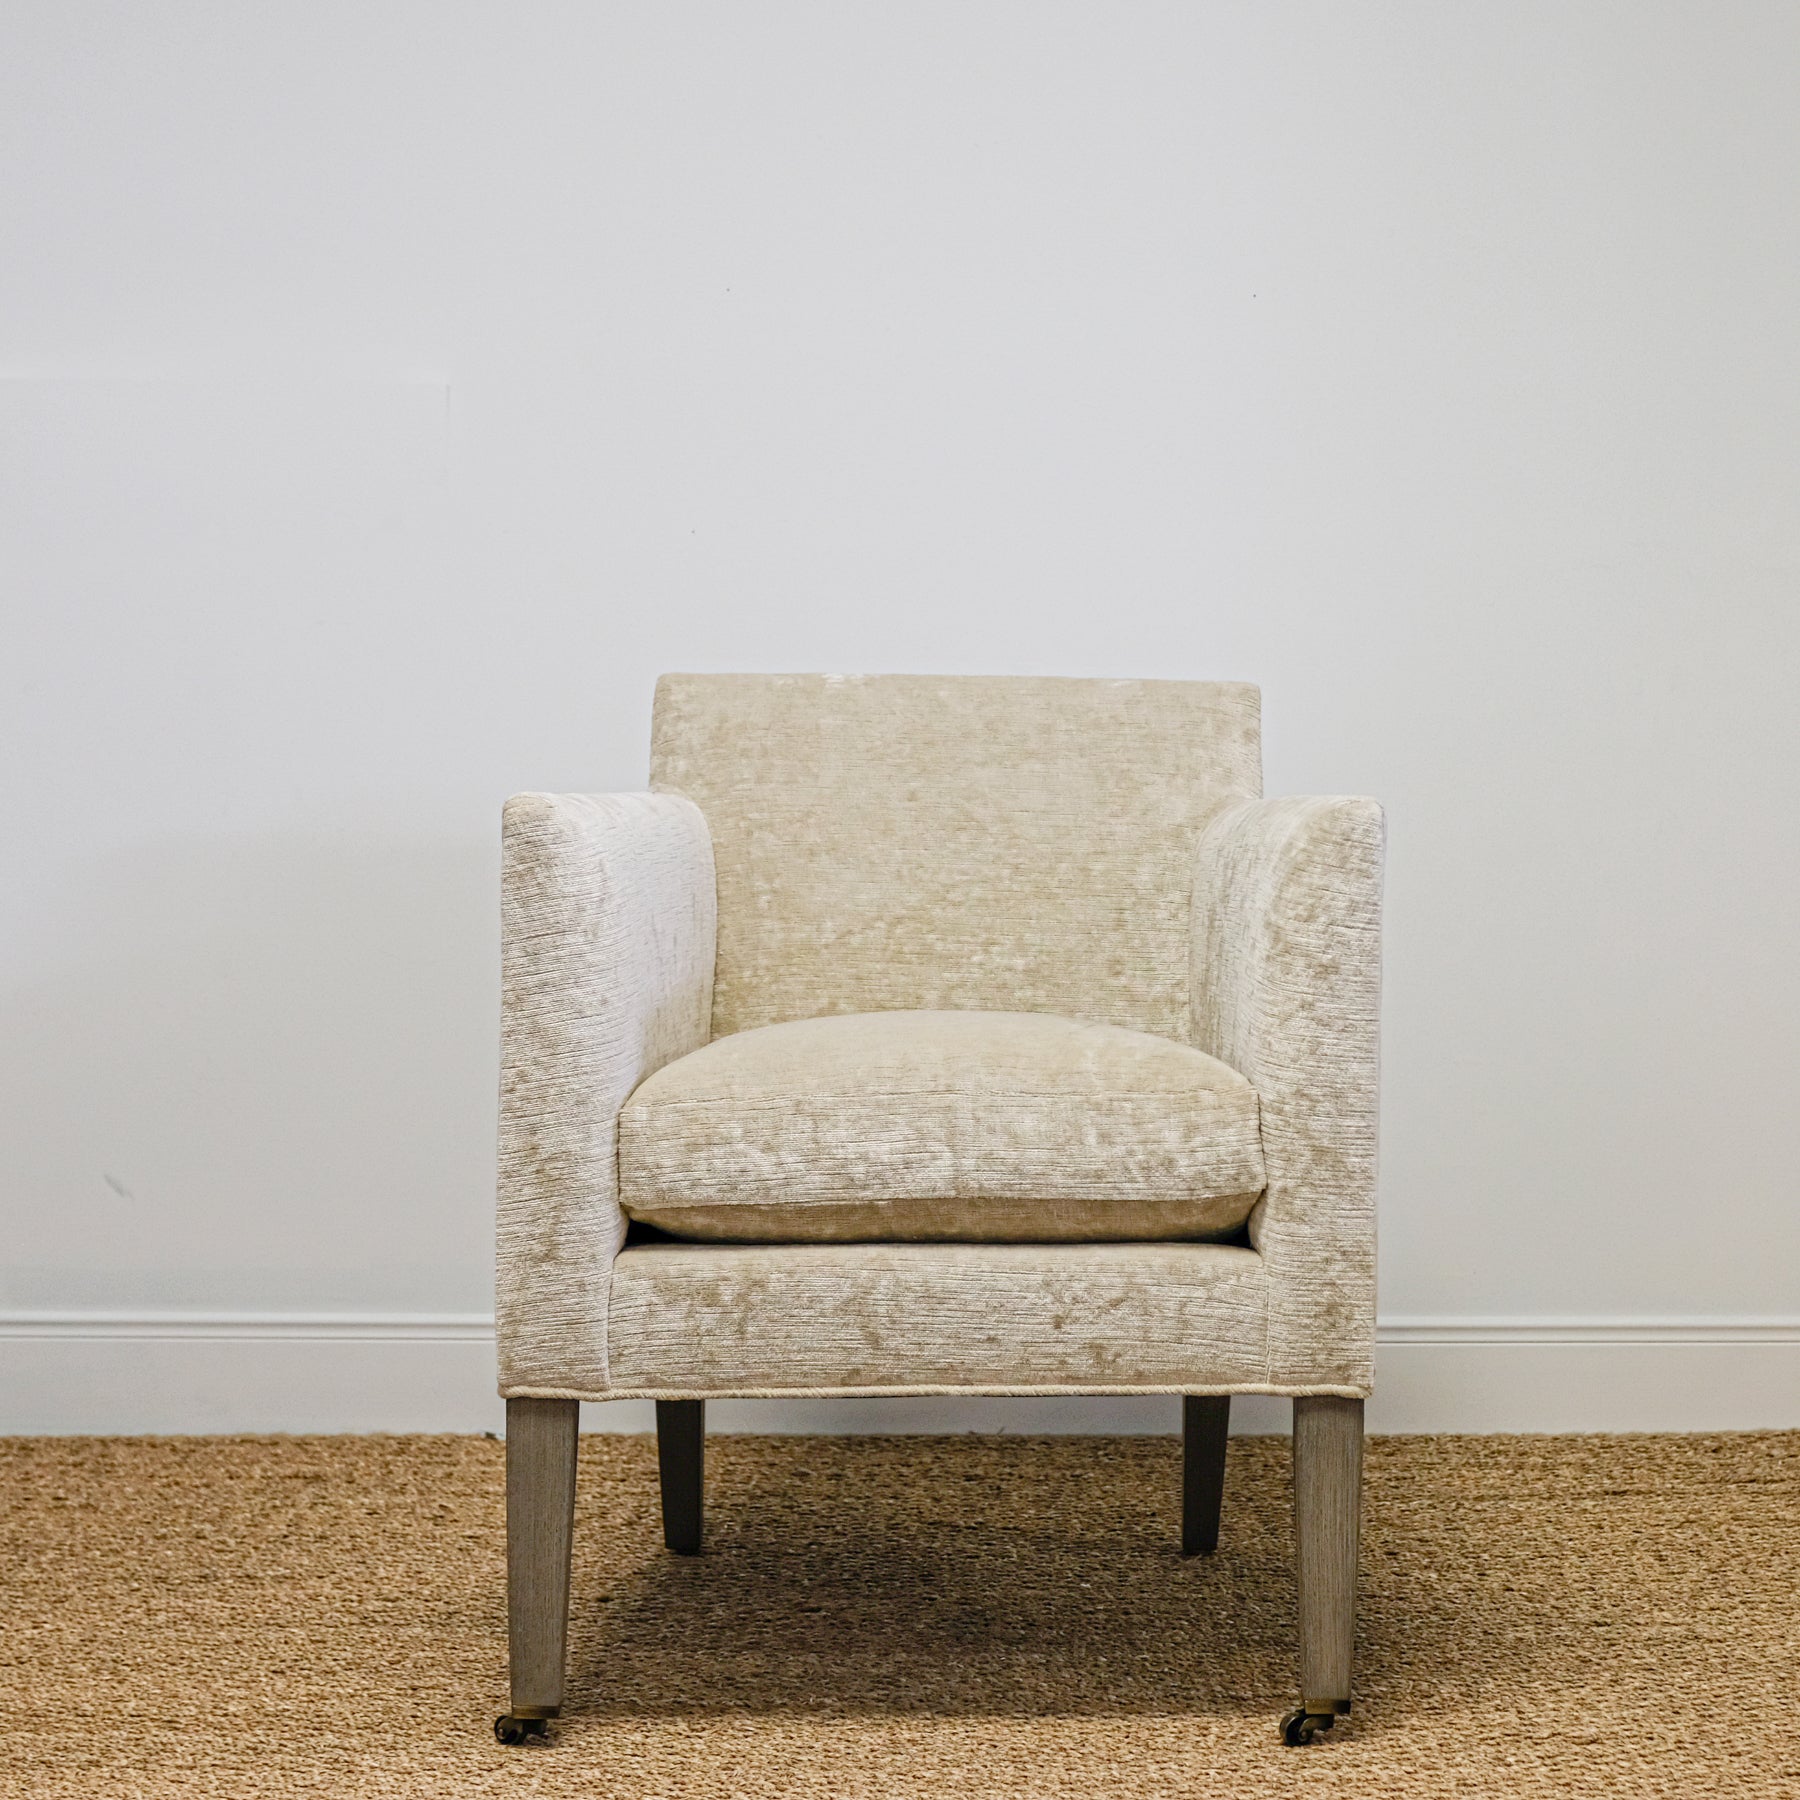 straight-on view of upholstered chair in mottled beige velvet with exposed wood leg, casters on front legs